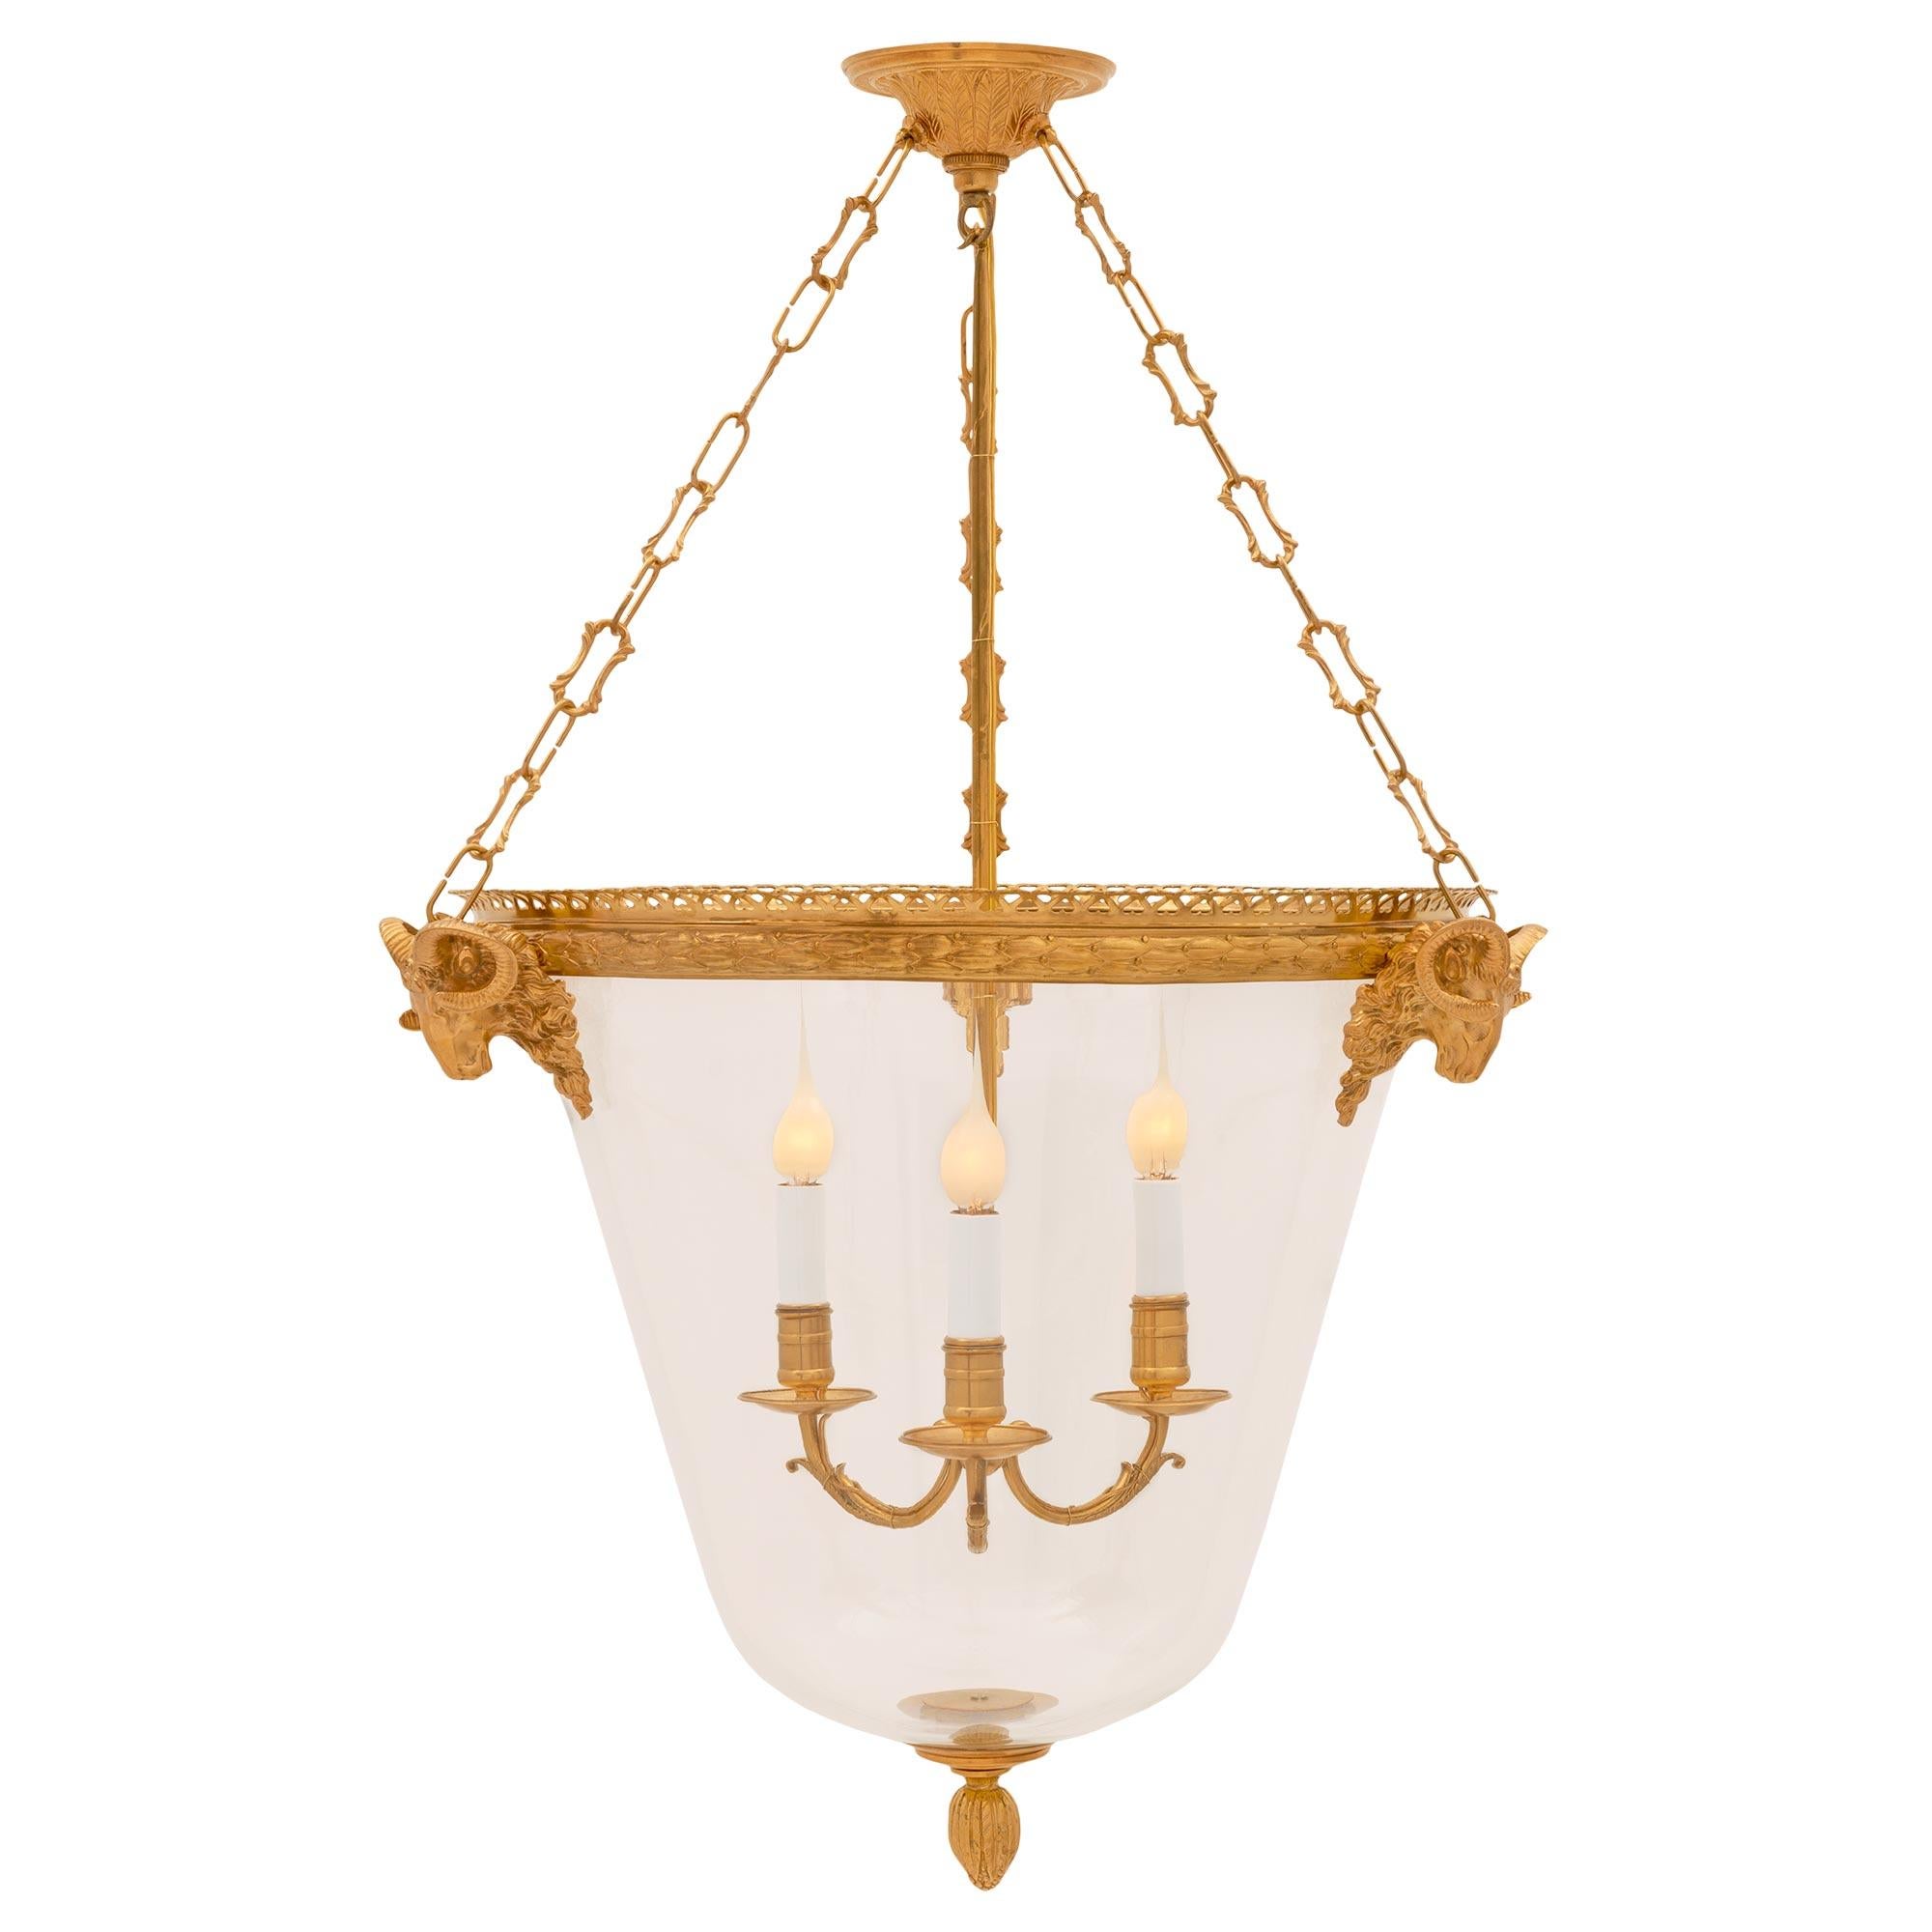 French 19th Century Louis XVI St. Belle Époque Period Ormolu and Glass Lantern For Sale 5